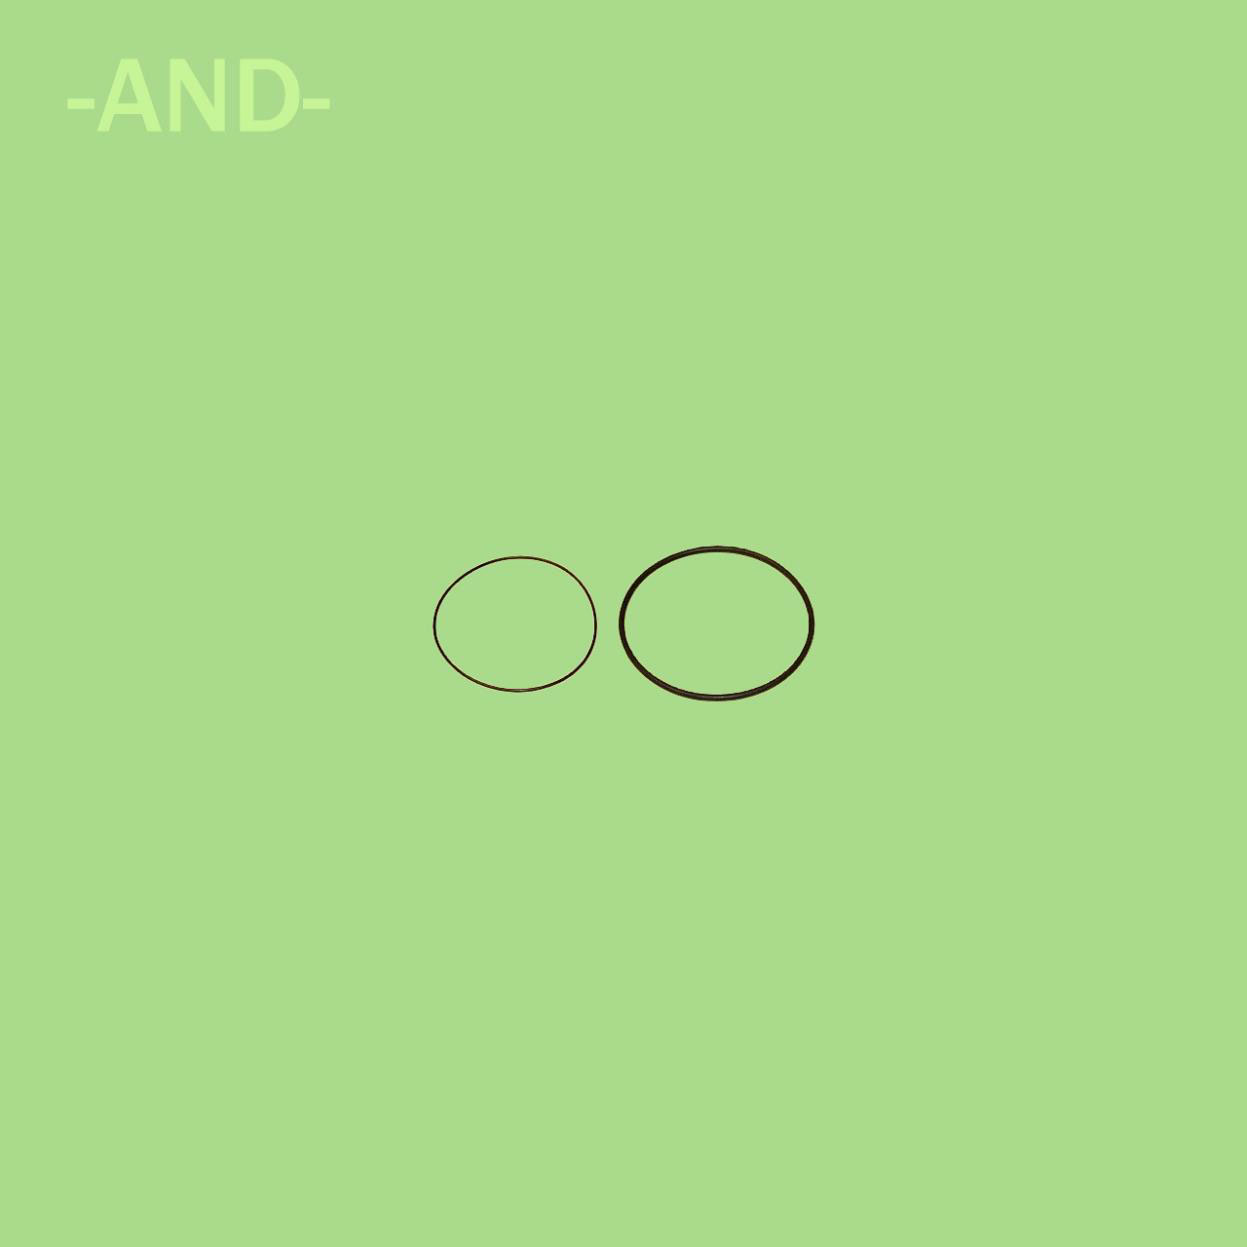 green background with two circles and the word "-AND-"